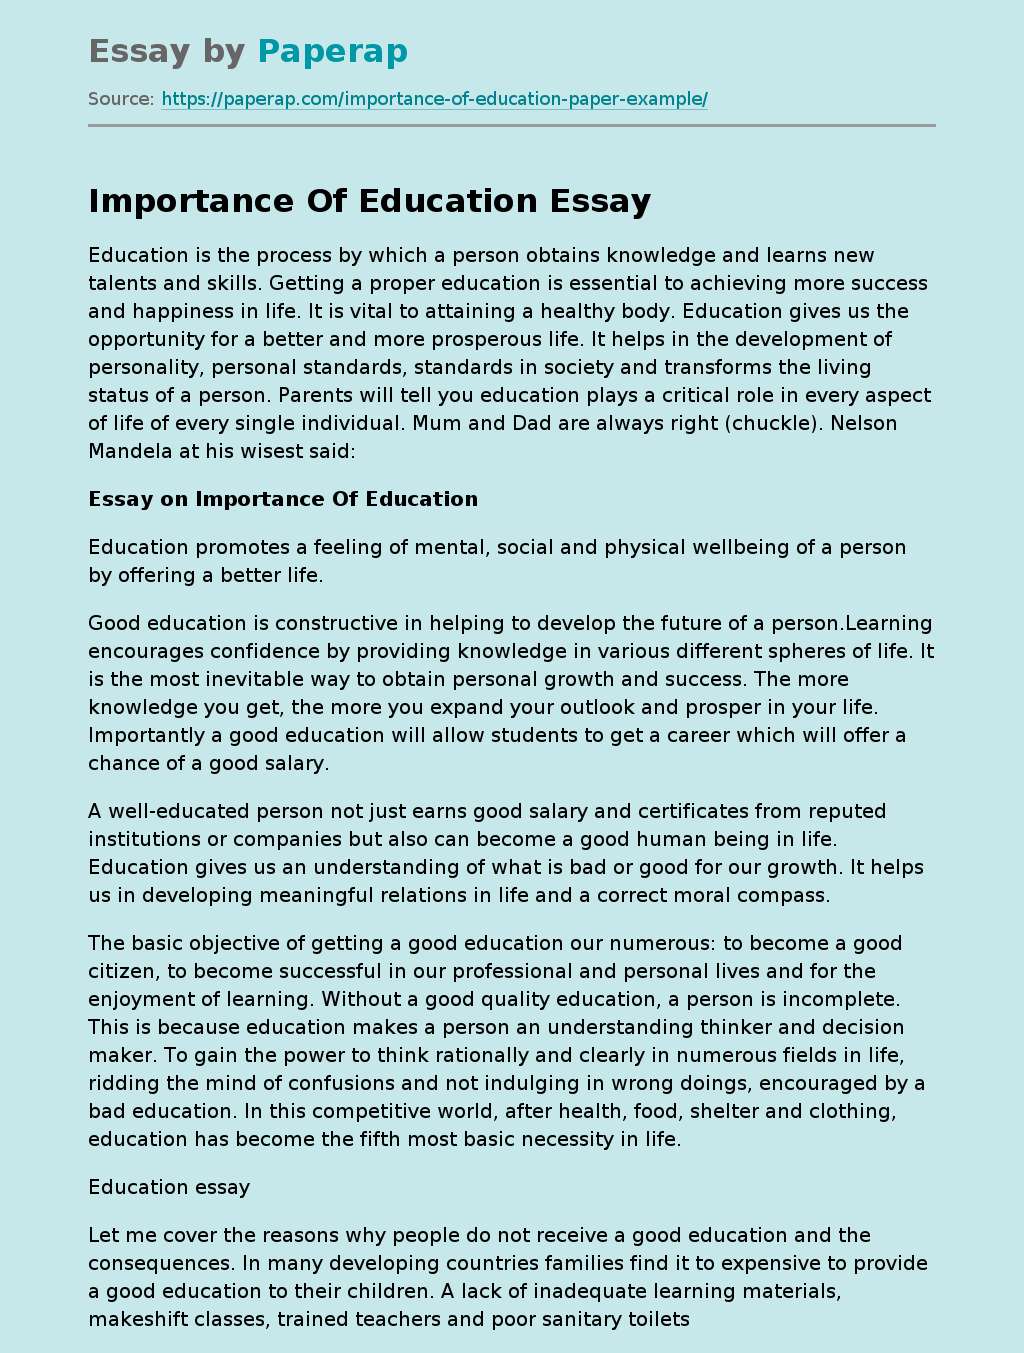 essay on importance of education with headings